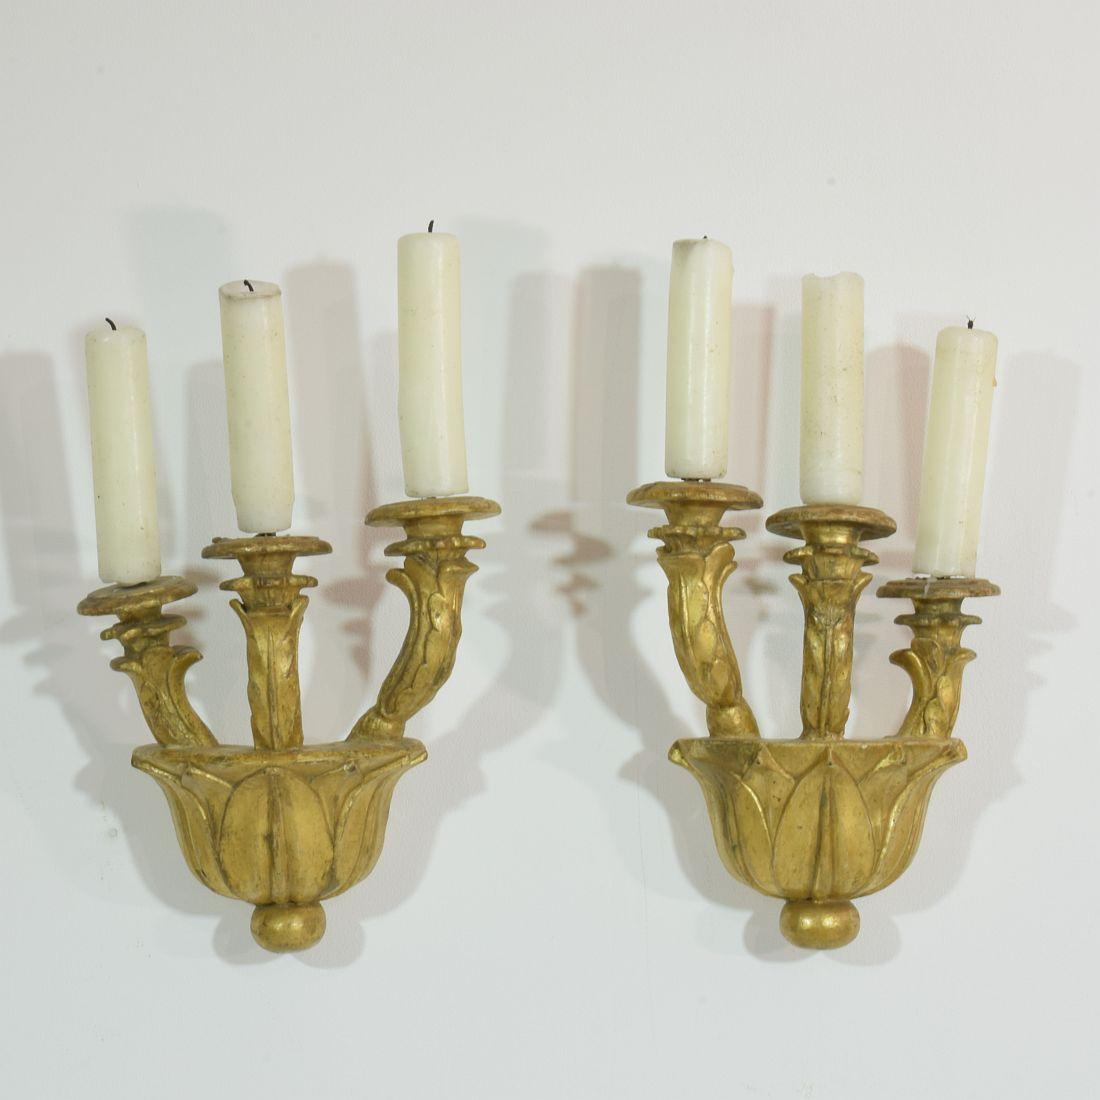 Hand-Carved Couple of Italian 18th Century Giltwood Baroque Candleholders or Sconces